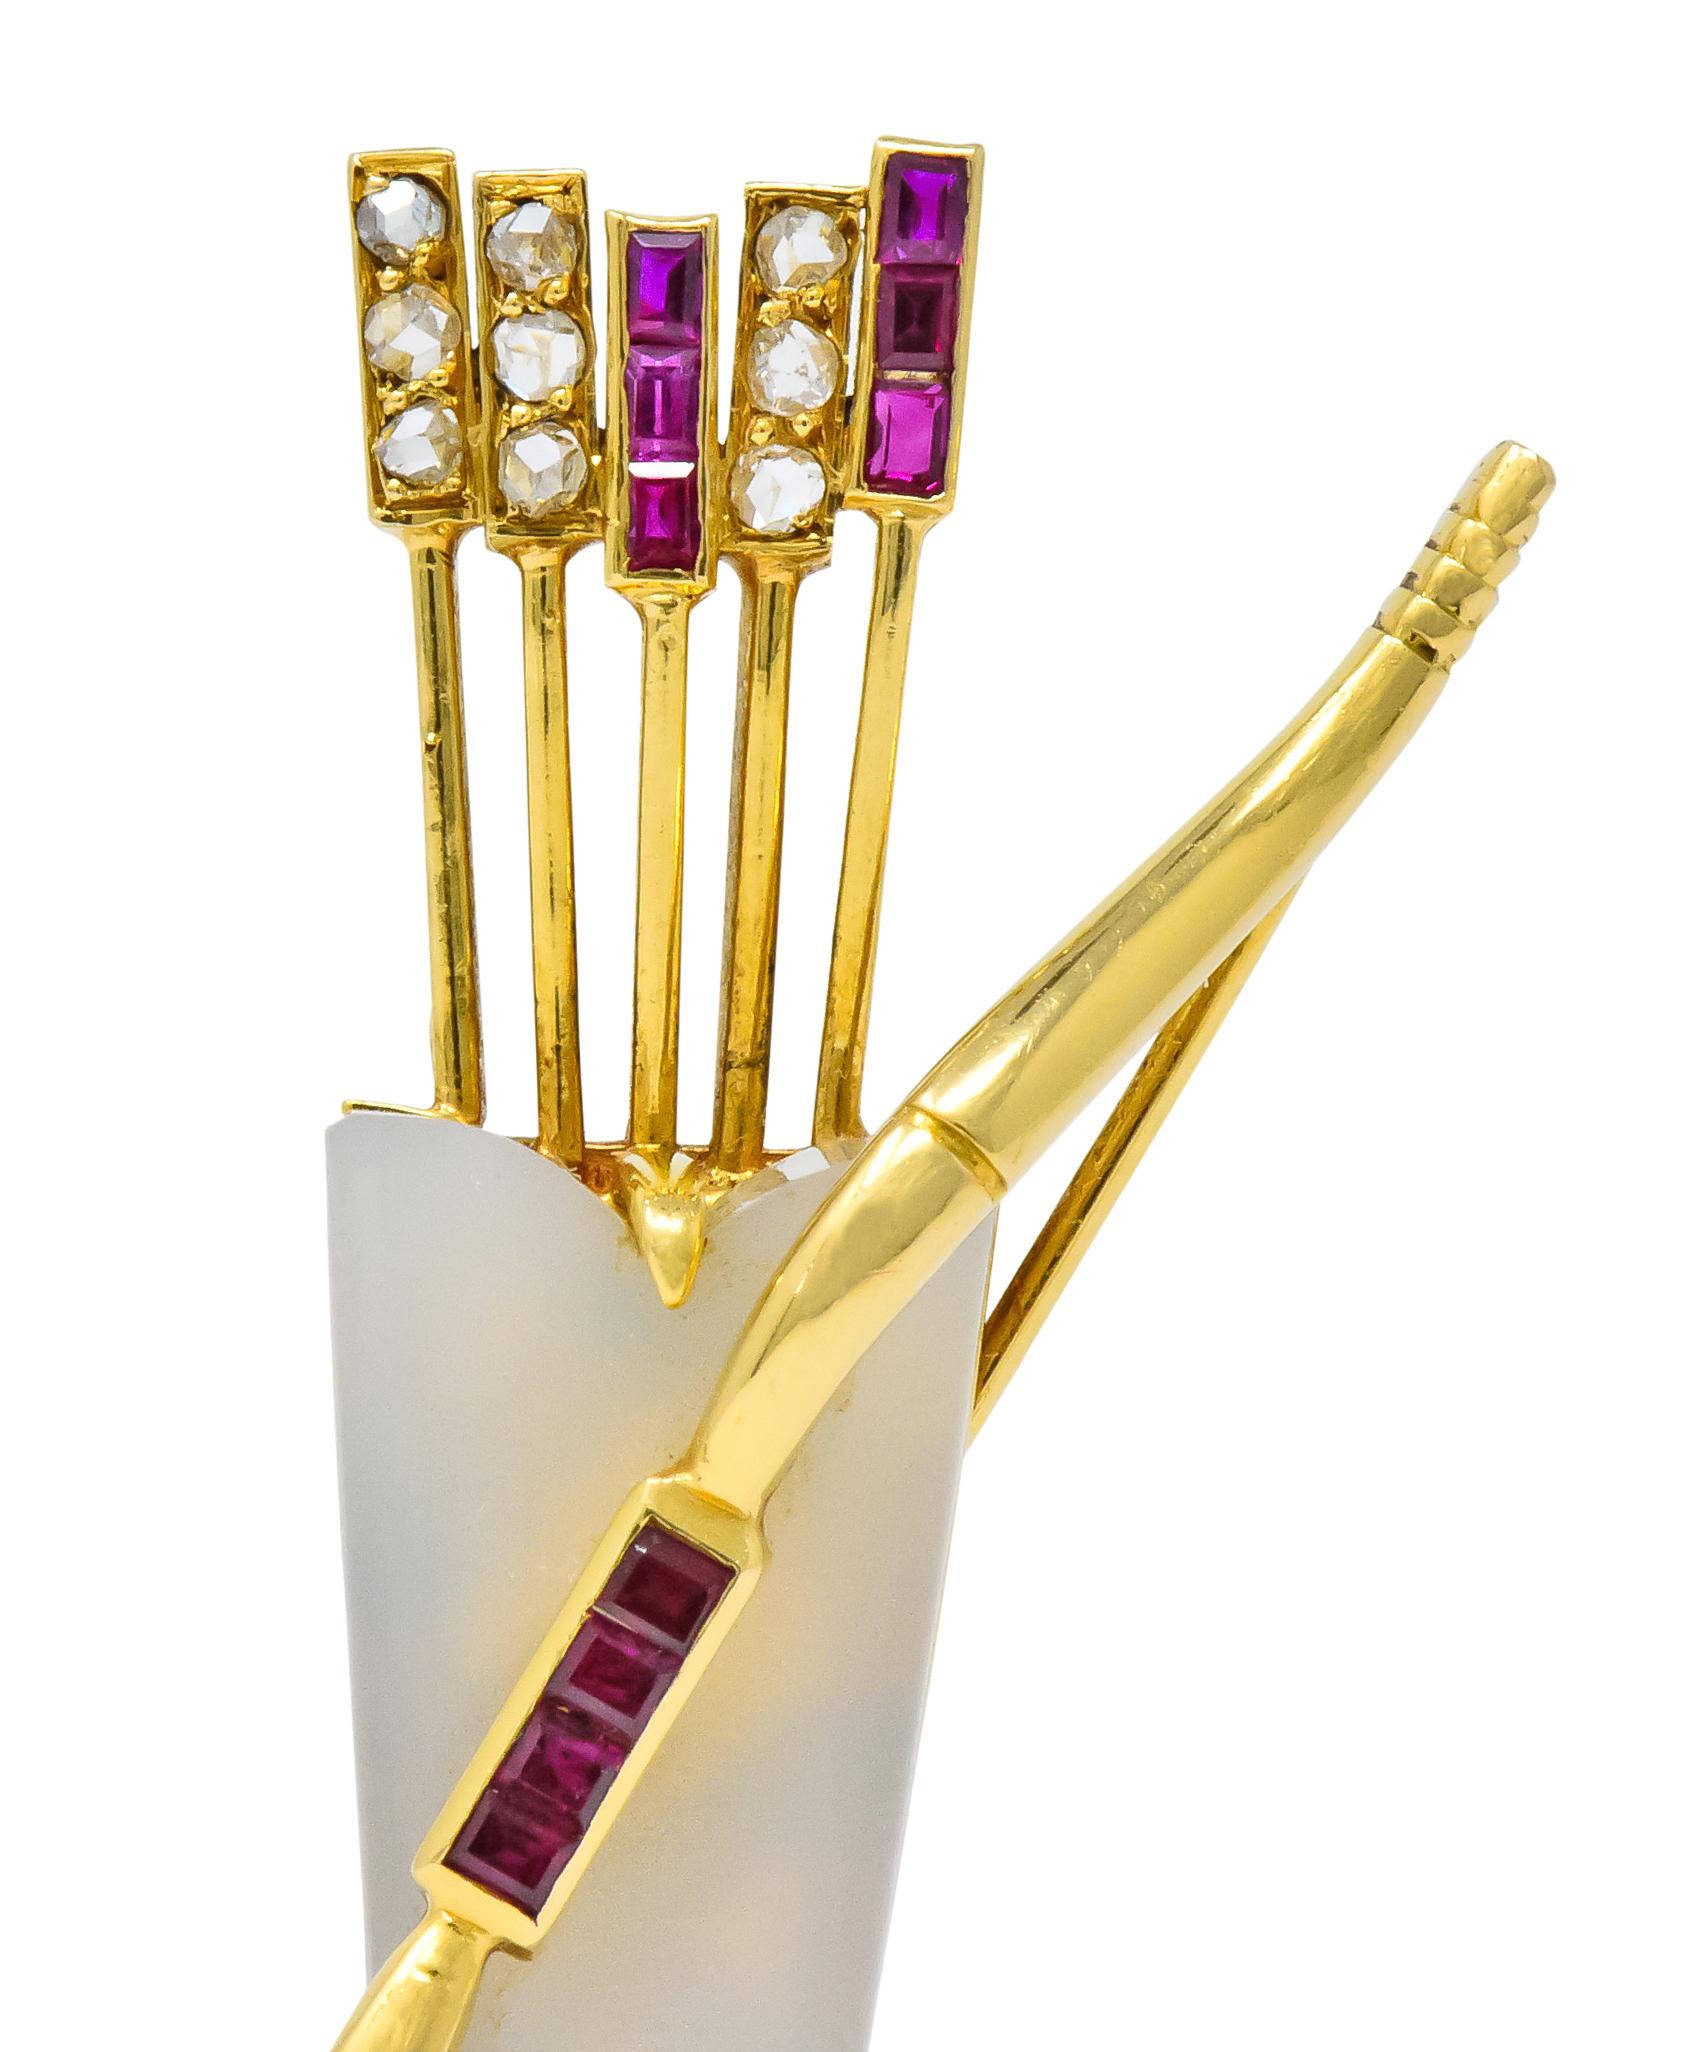 Designed as a bow with a quiver full of arrows

Carved and polished white agate quiver, terminating in a rose cut diamond 

With channel set rose cut diamond and square calibré cut ruby fletchings upon arrows

Bow accented with channel set square